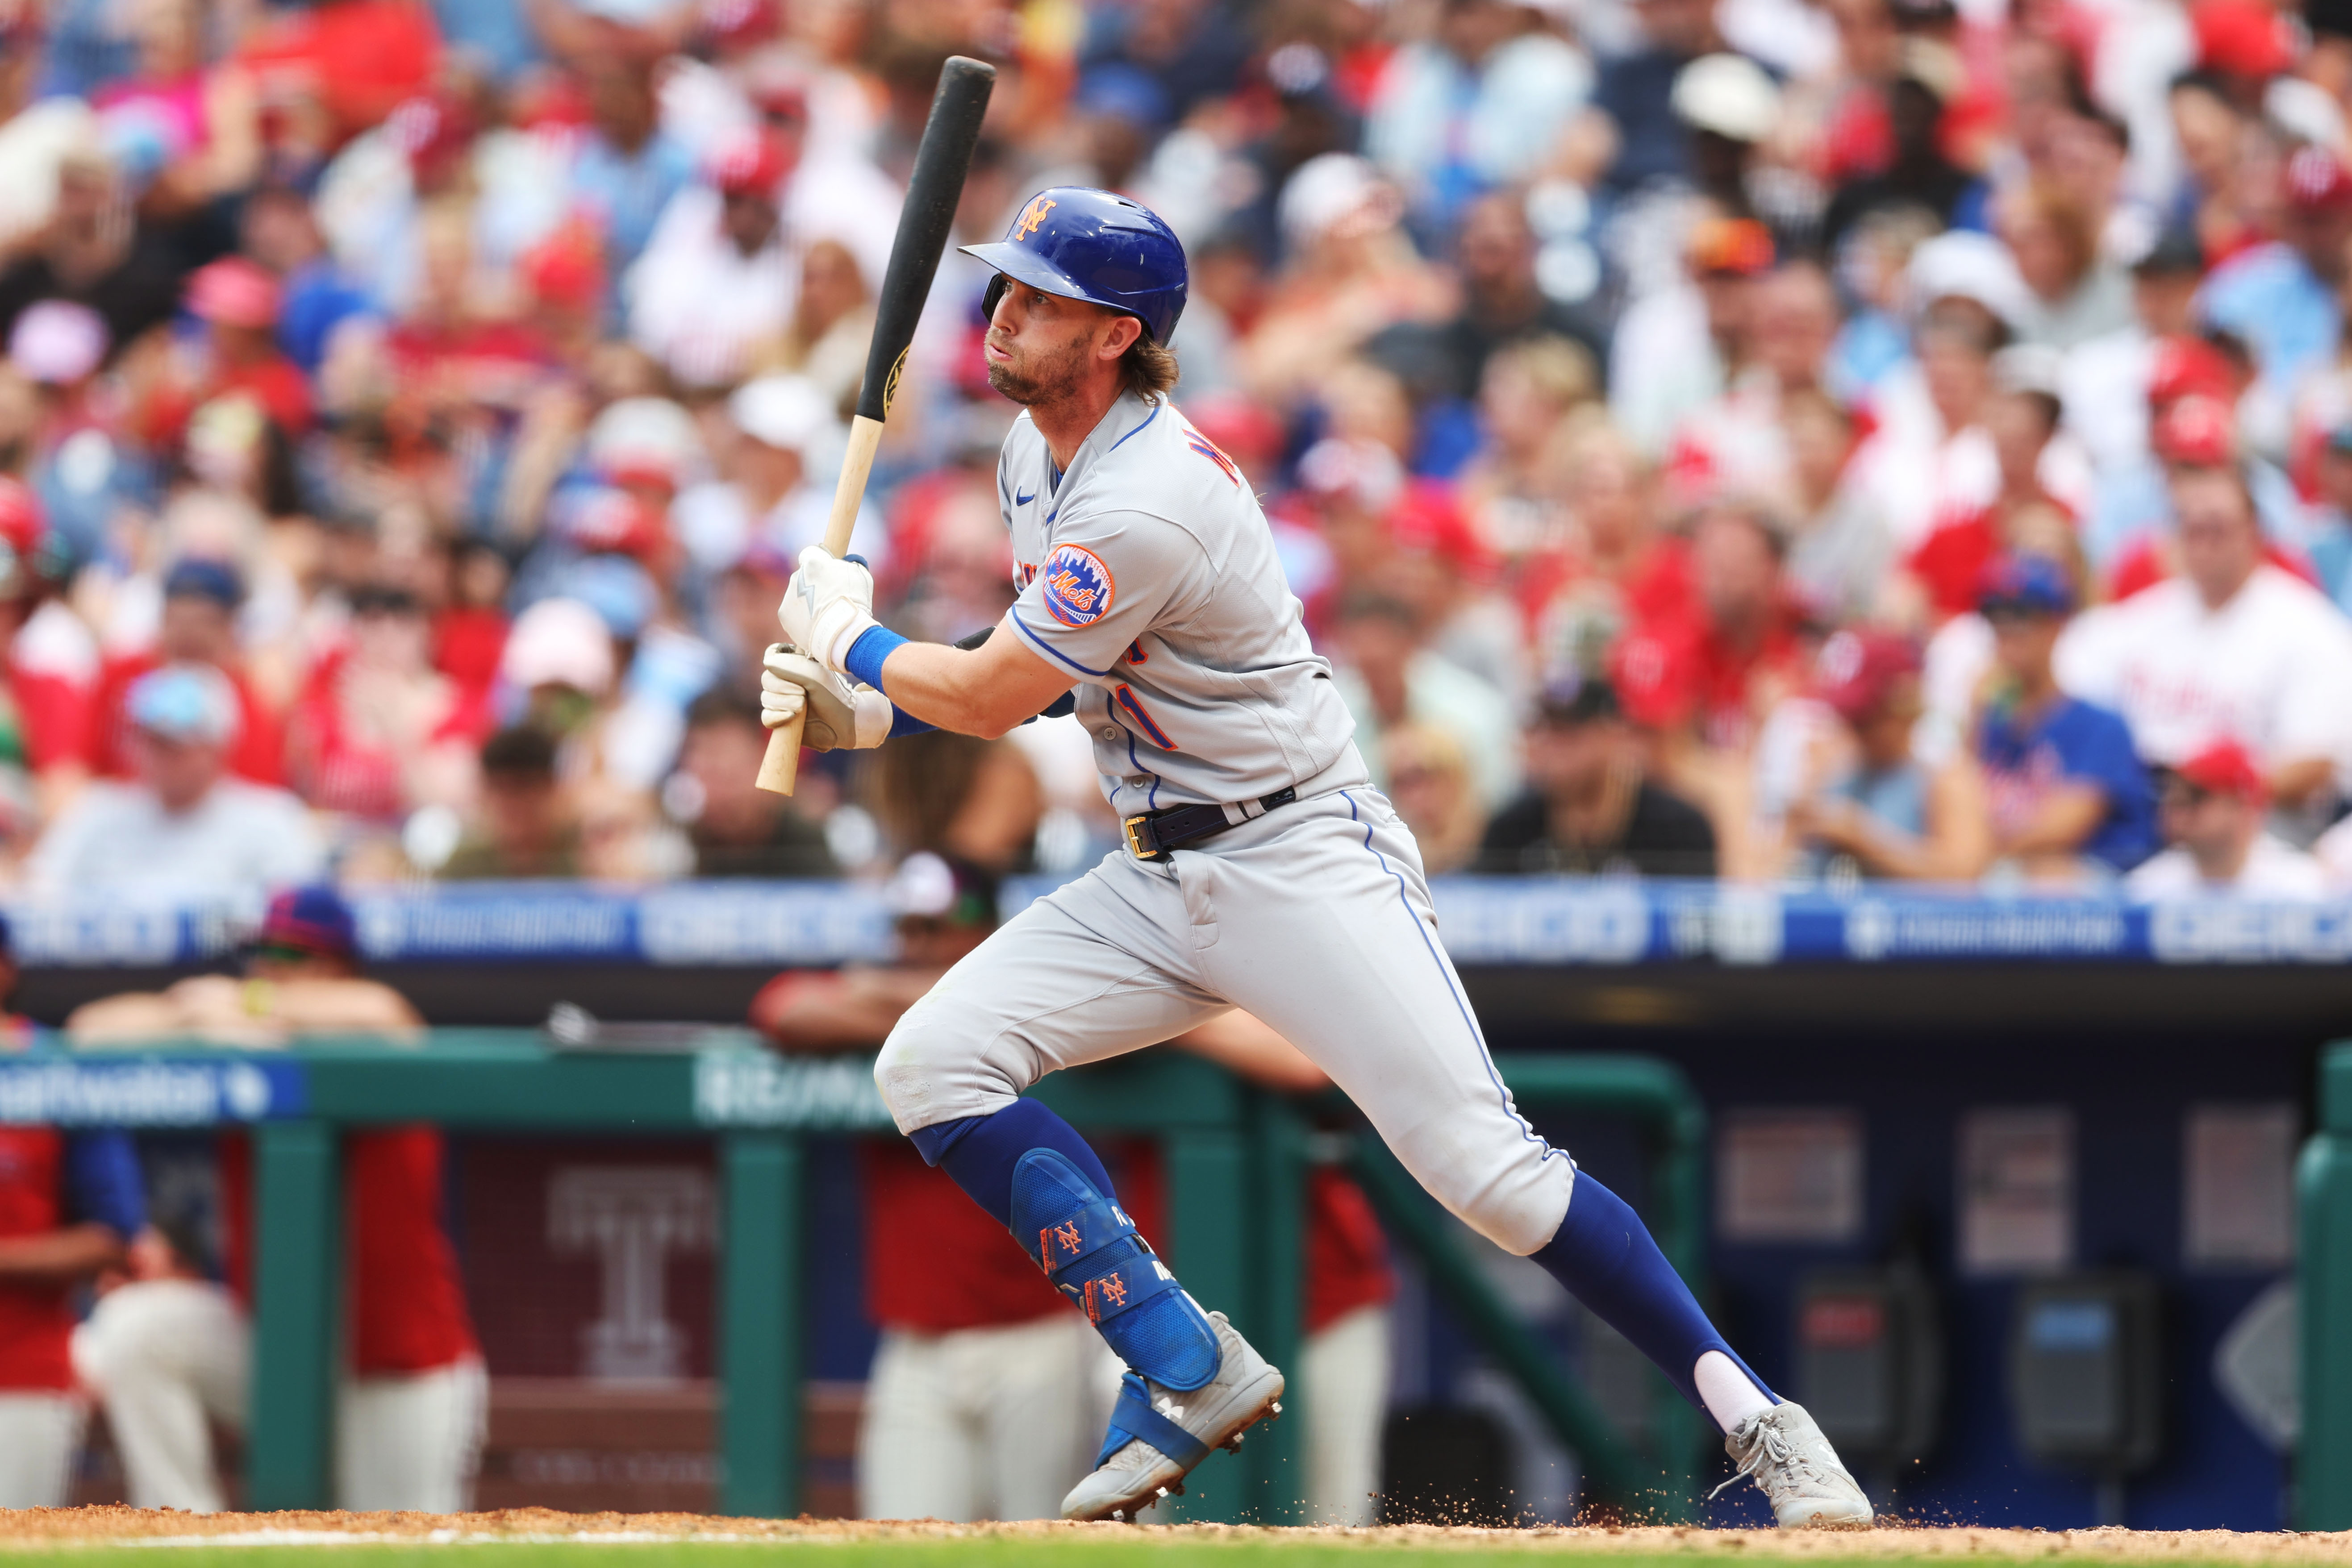 VIDEO: Jeff McNeil Hits Home Run After Fan Heckles Him About 'Power